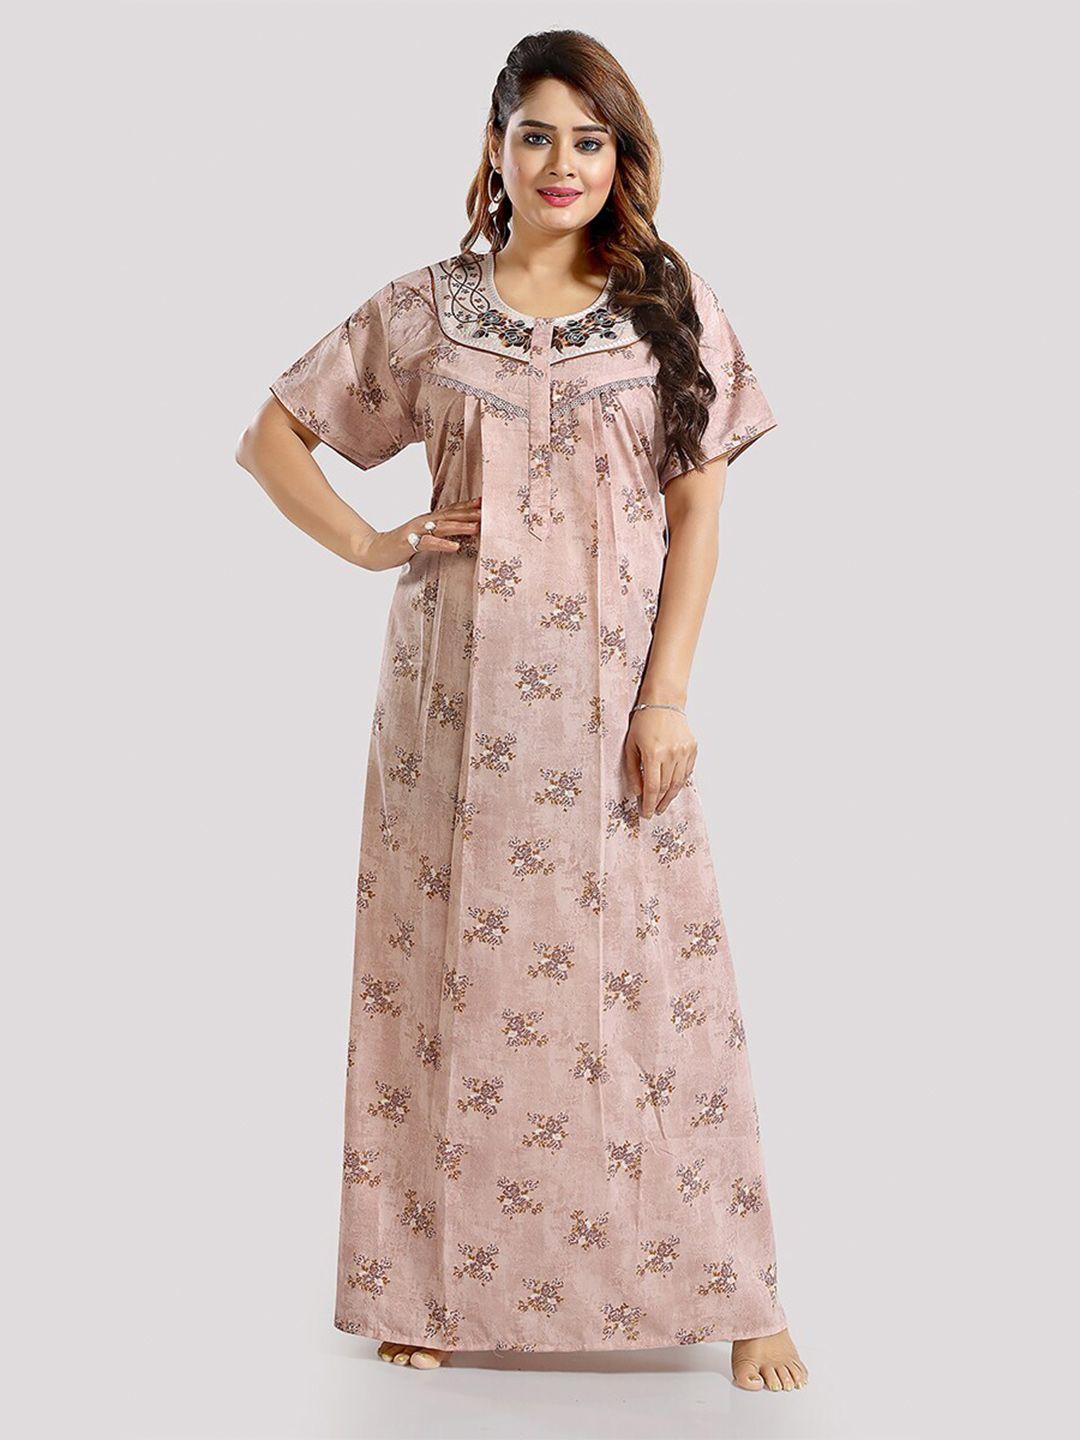 be-you-floral-printed-maxi-nightdress